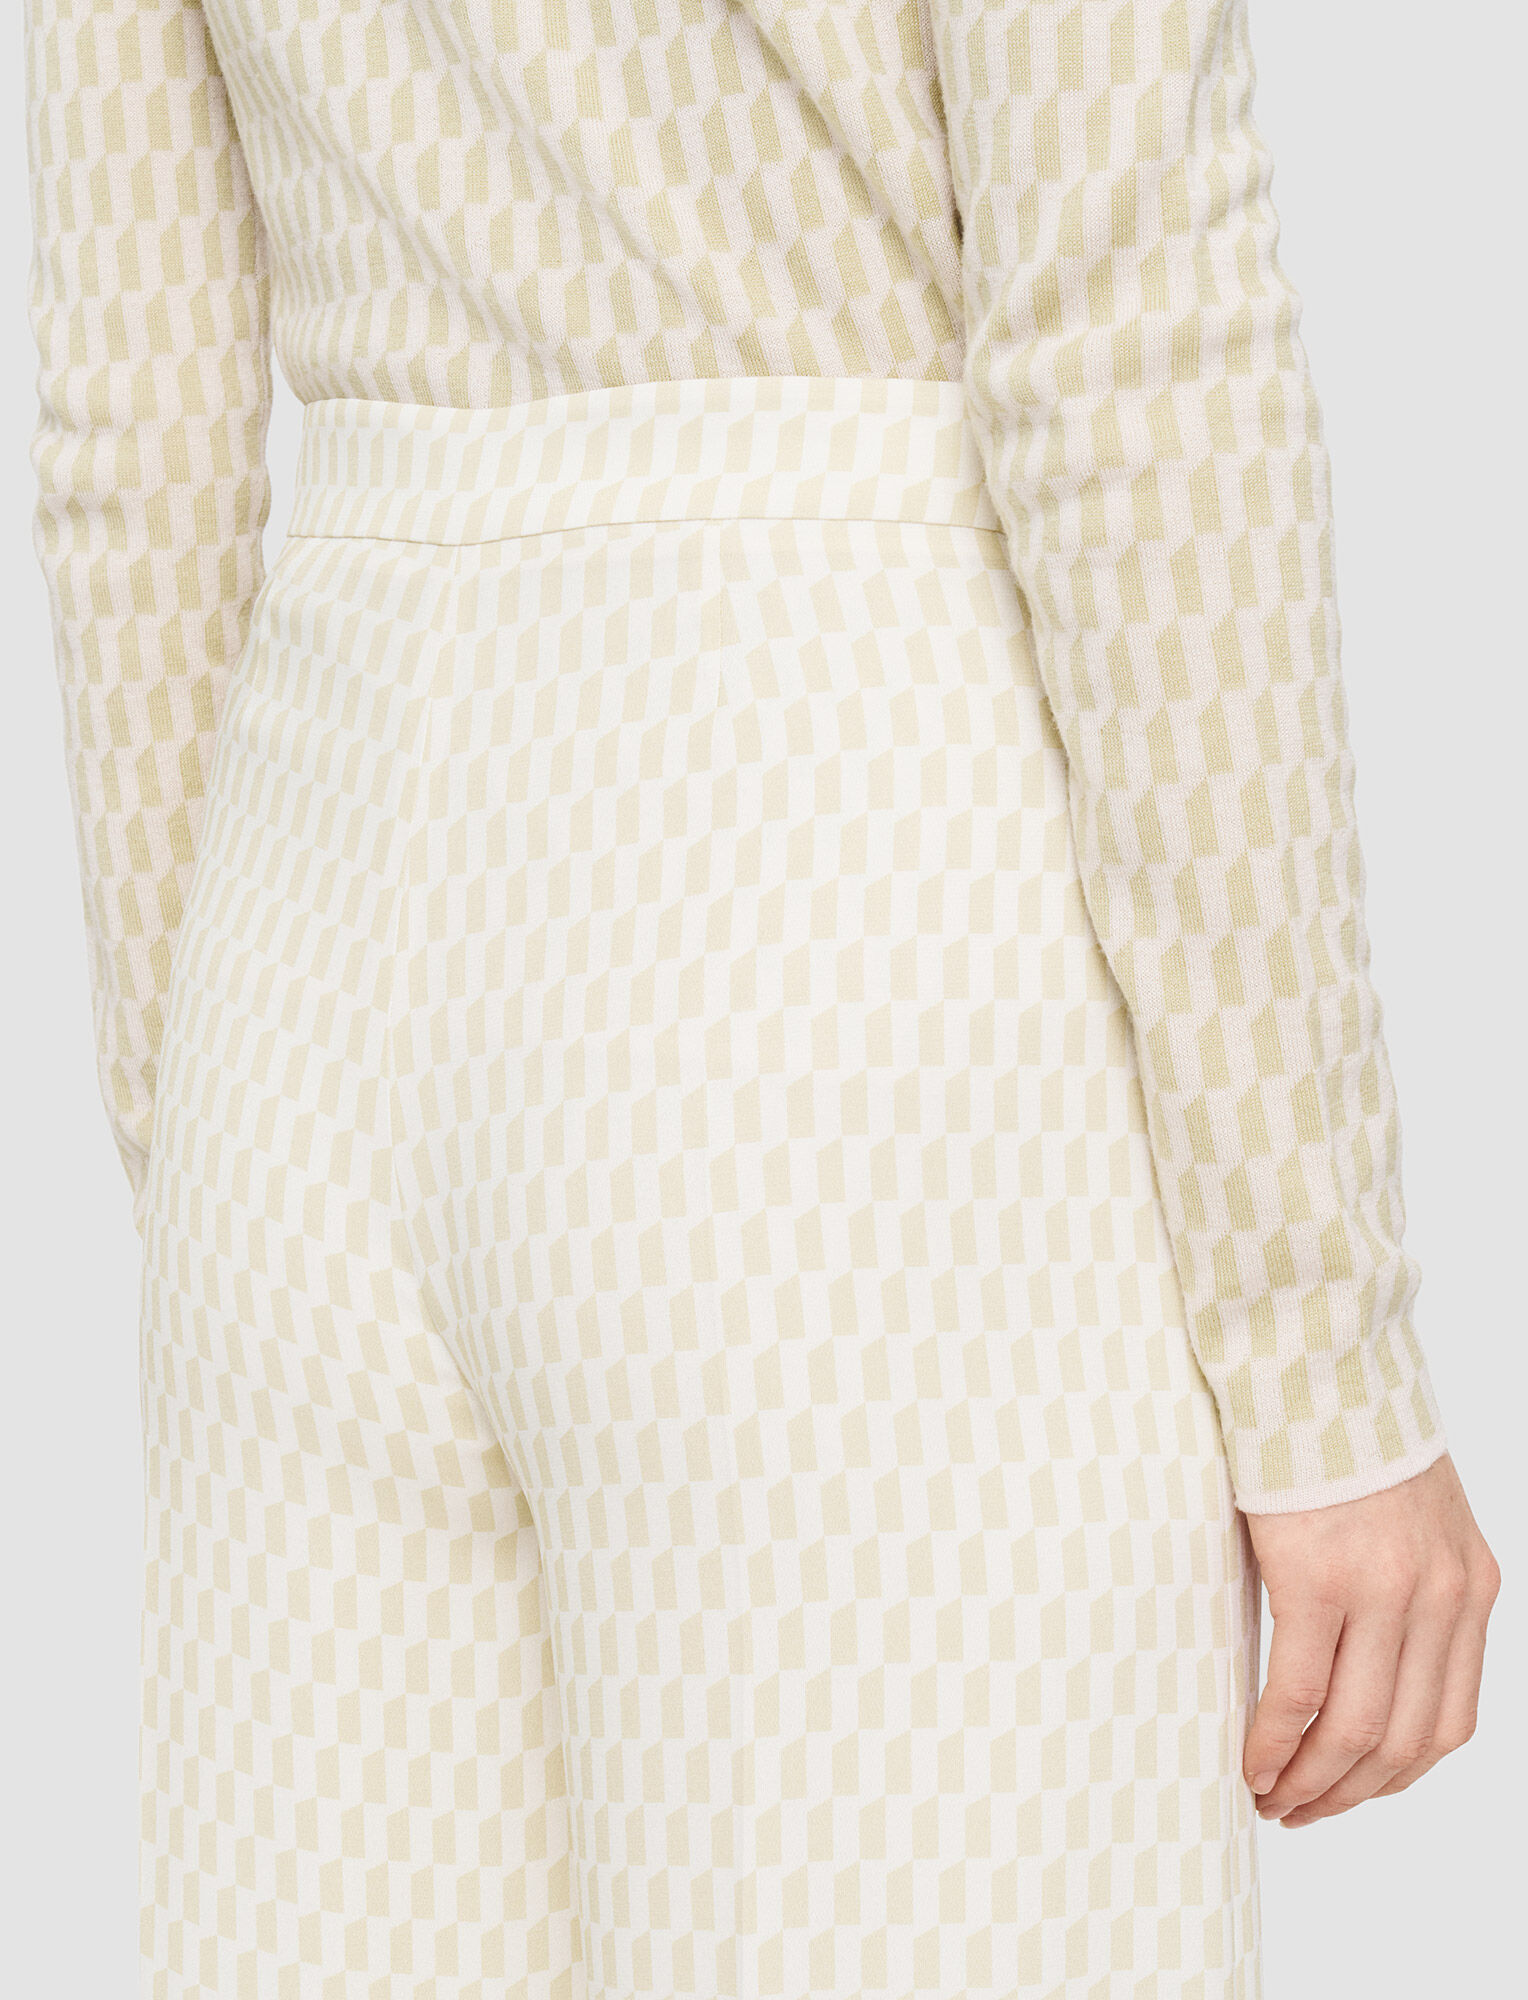 Joseph, Alcove Print Alane Trousers, in Pale Olive/Ivory